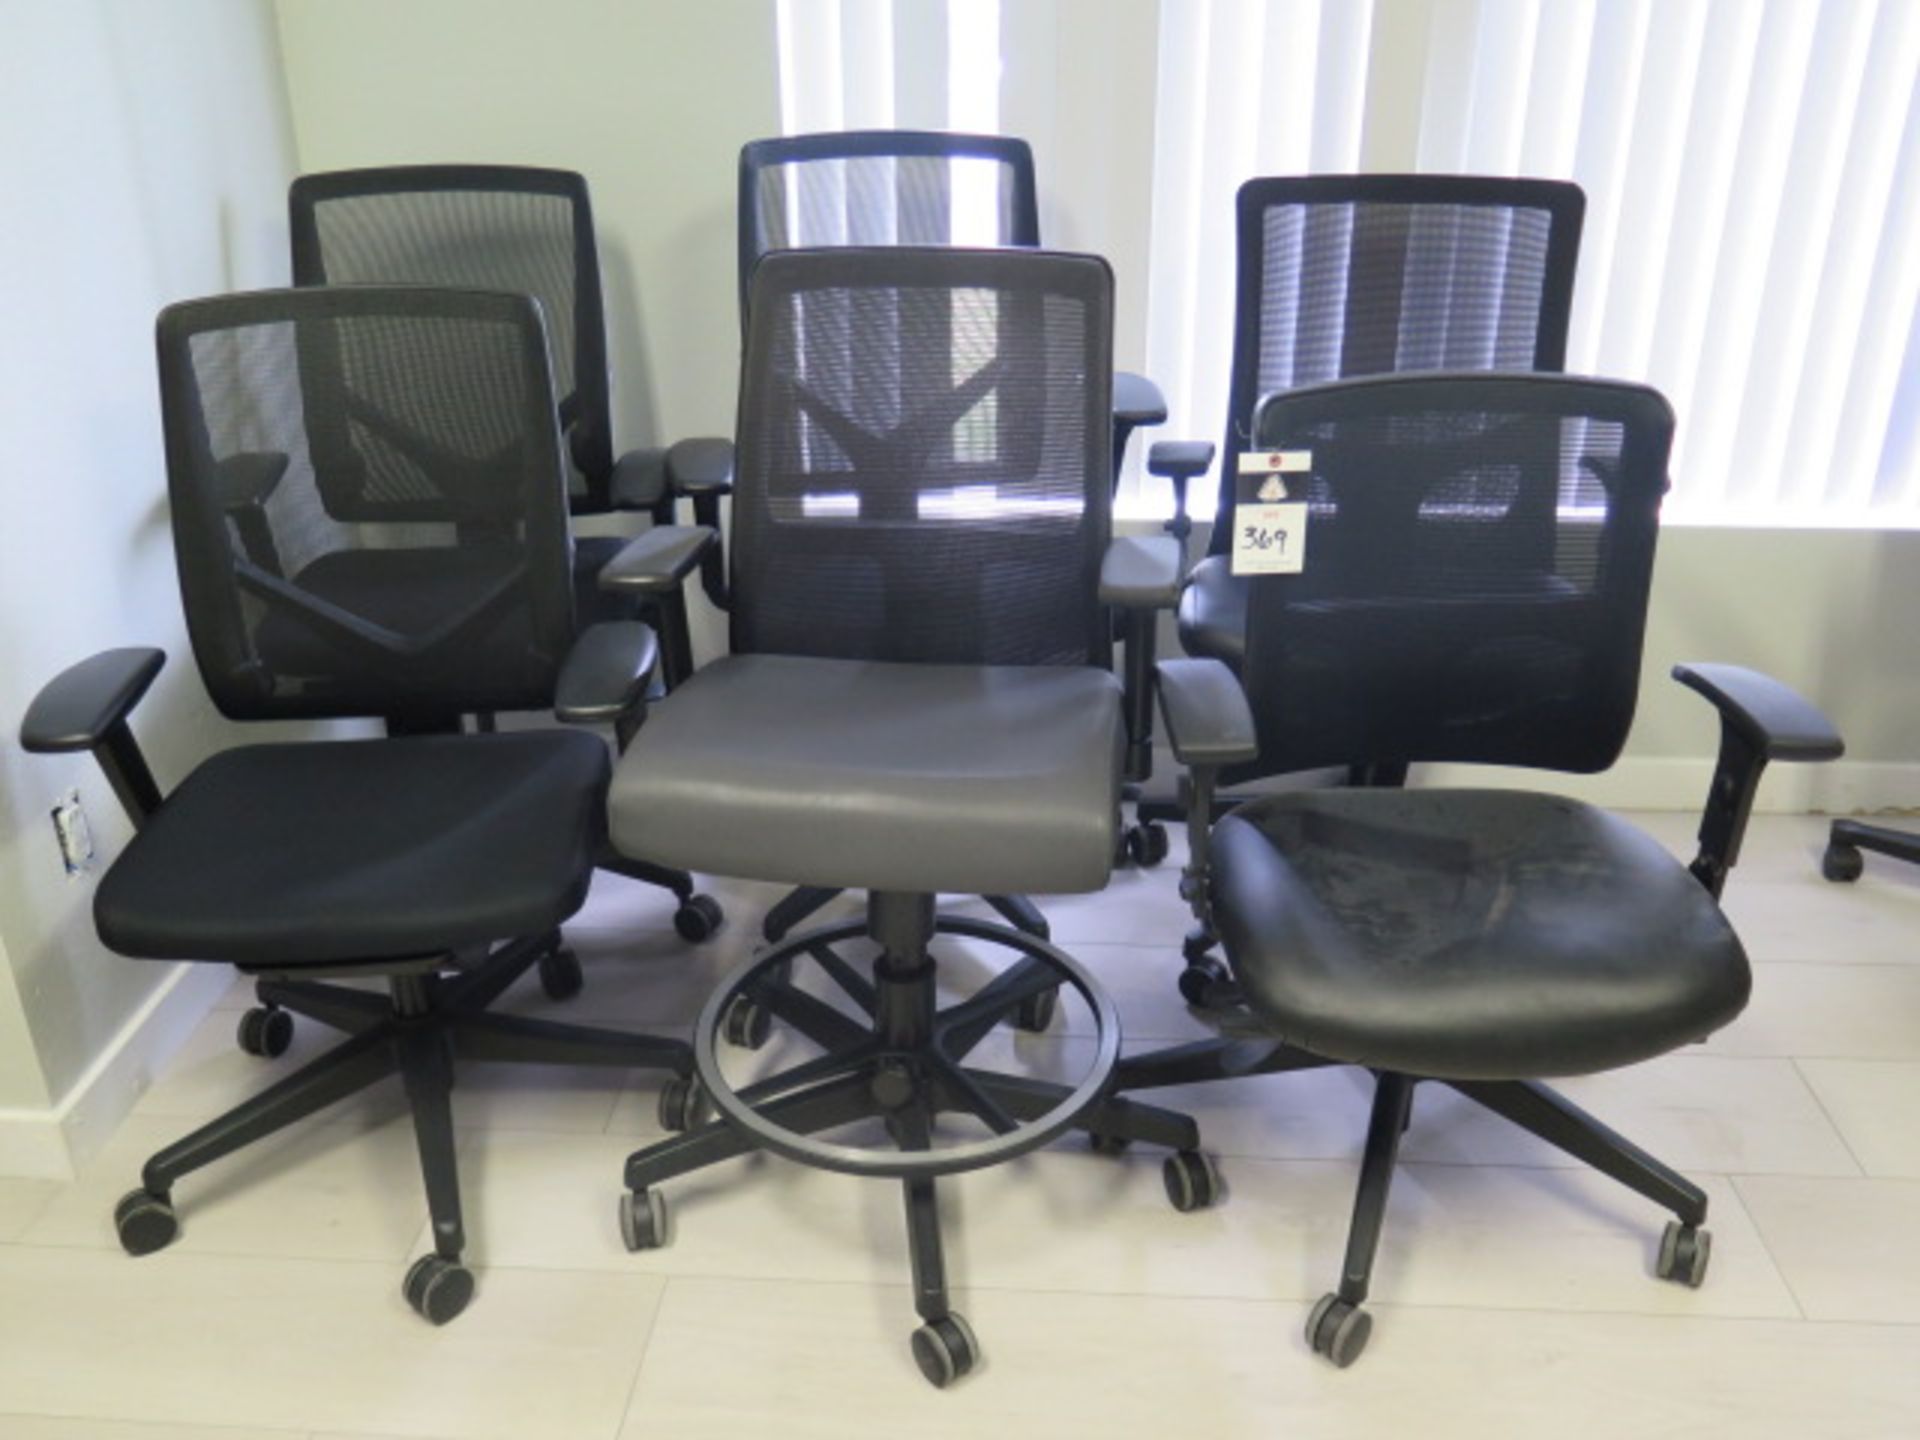 Office Chairs (6) (SOLD AS-IS - NO WARRANTY)